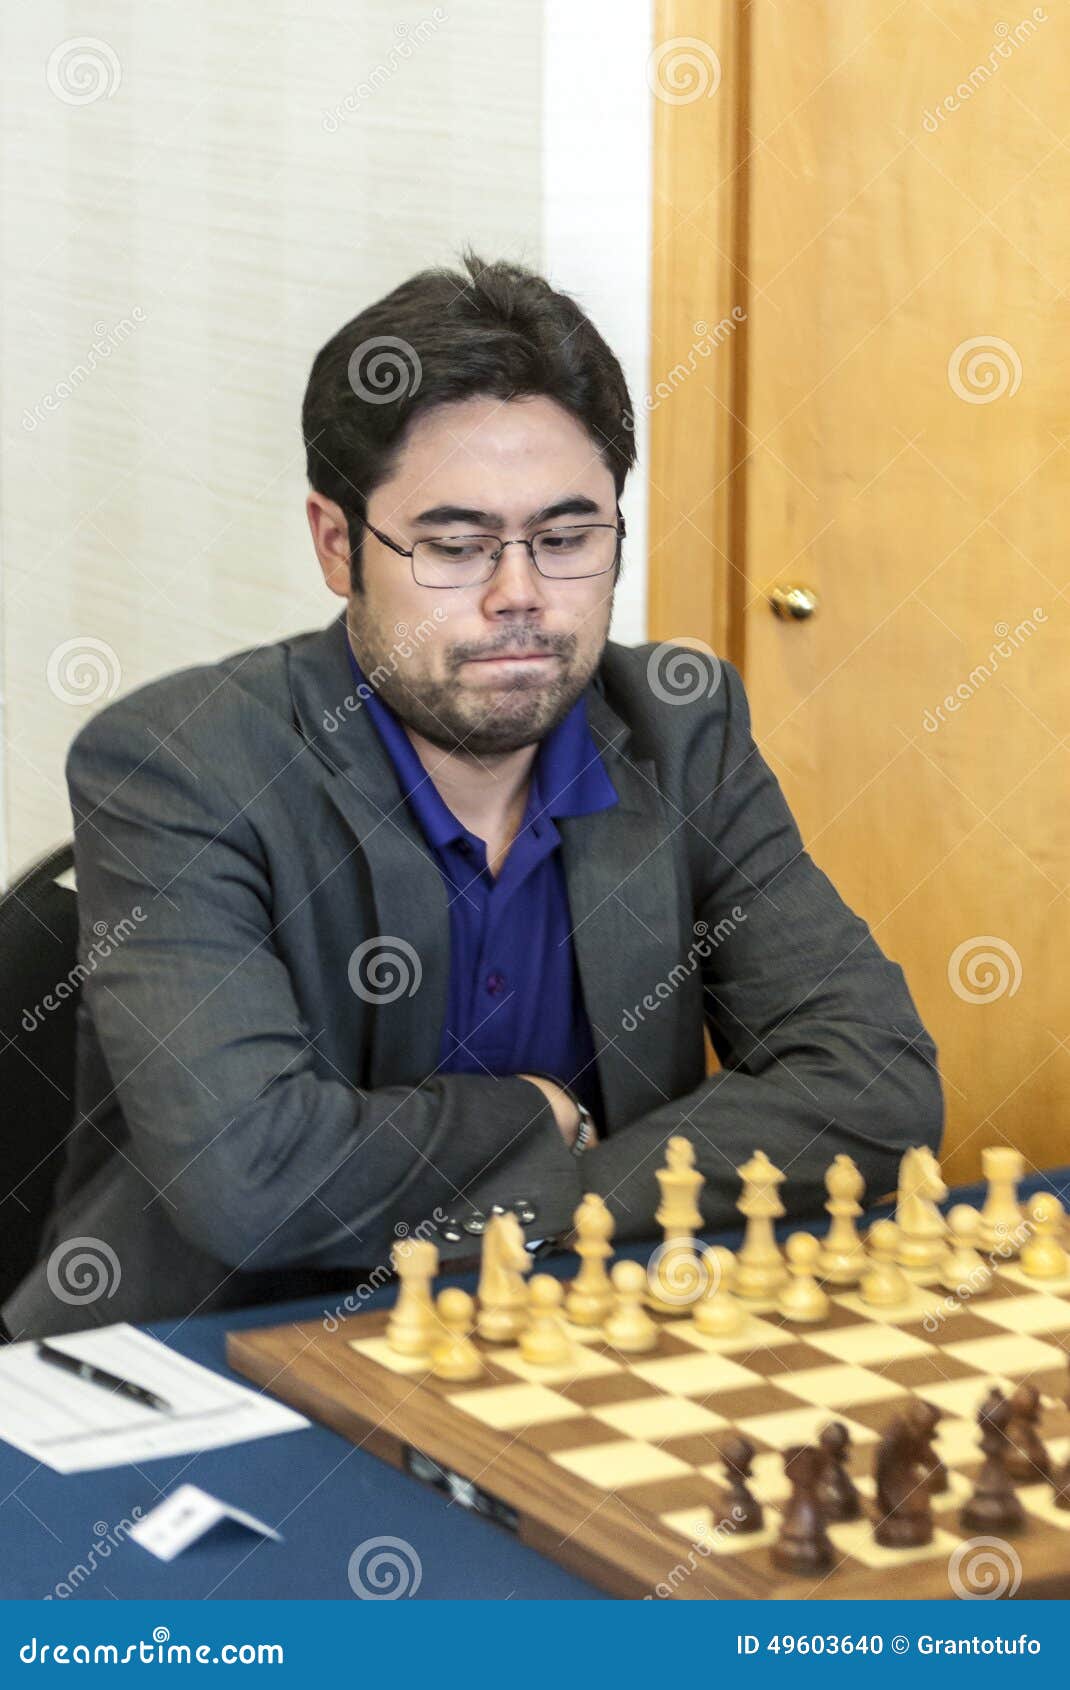 If Hikaru Nakamura makes it to the chess championship candidates  tournament, how is he likely to do in it? - Quora